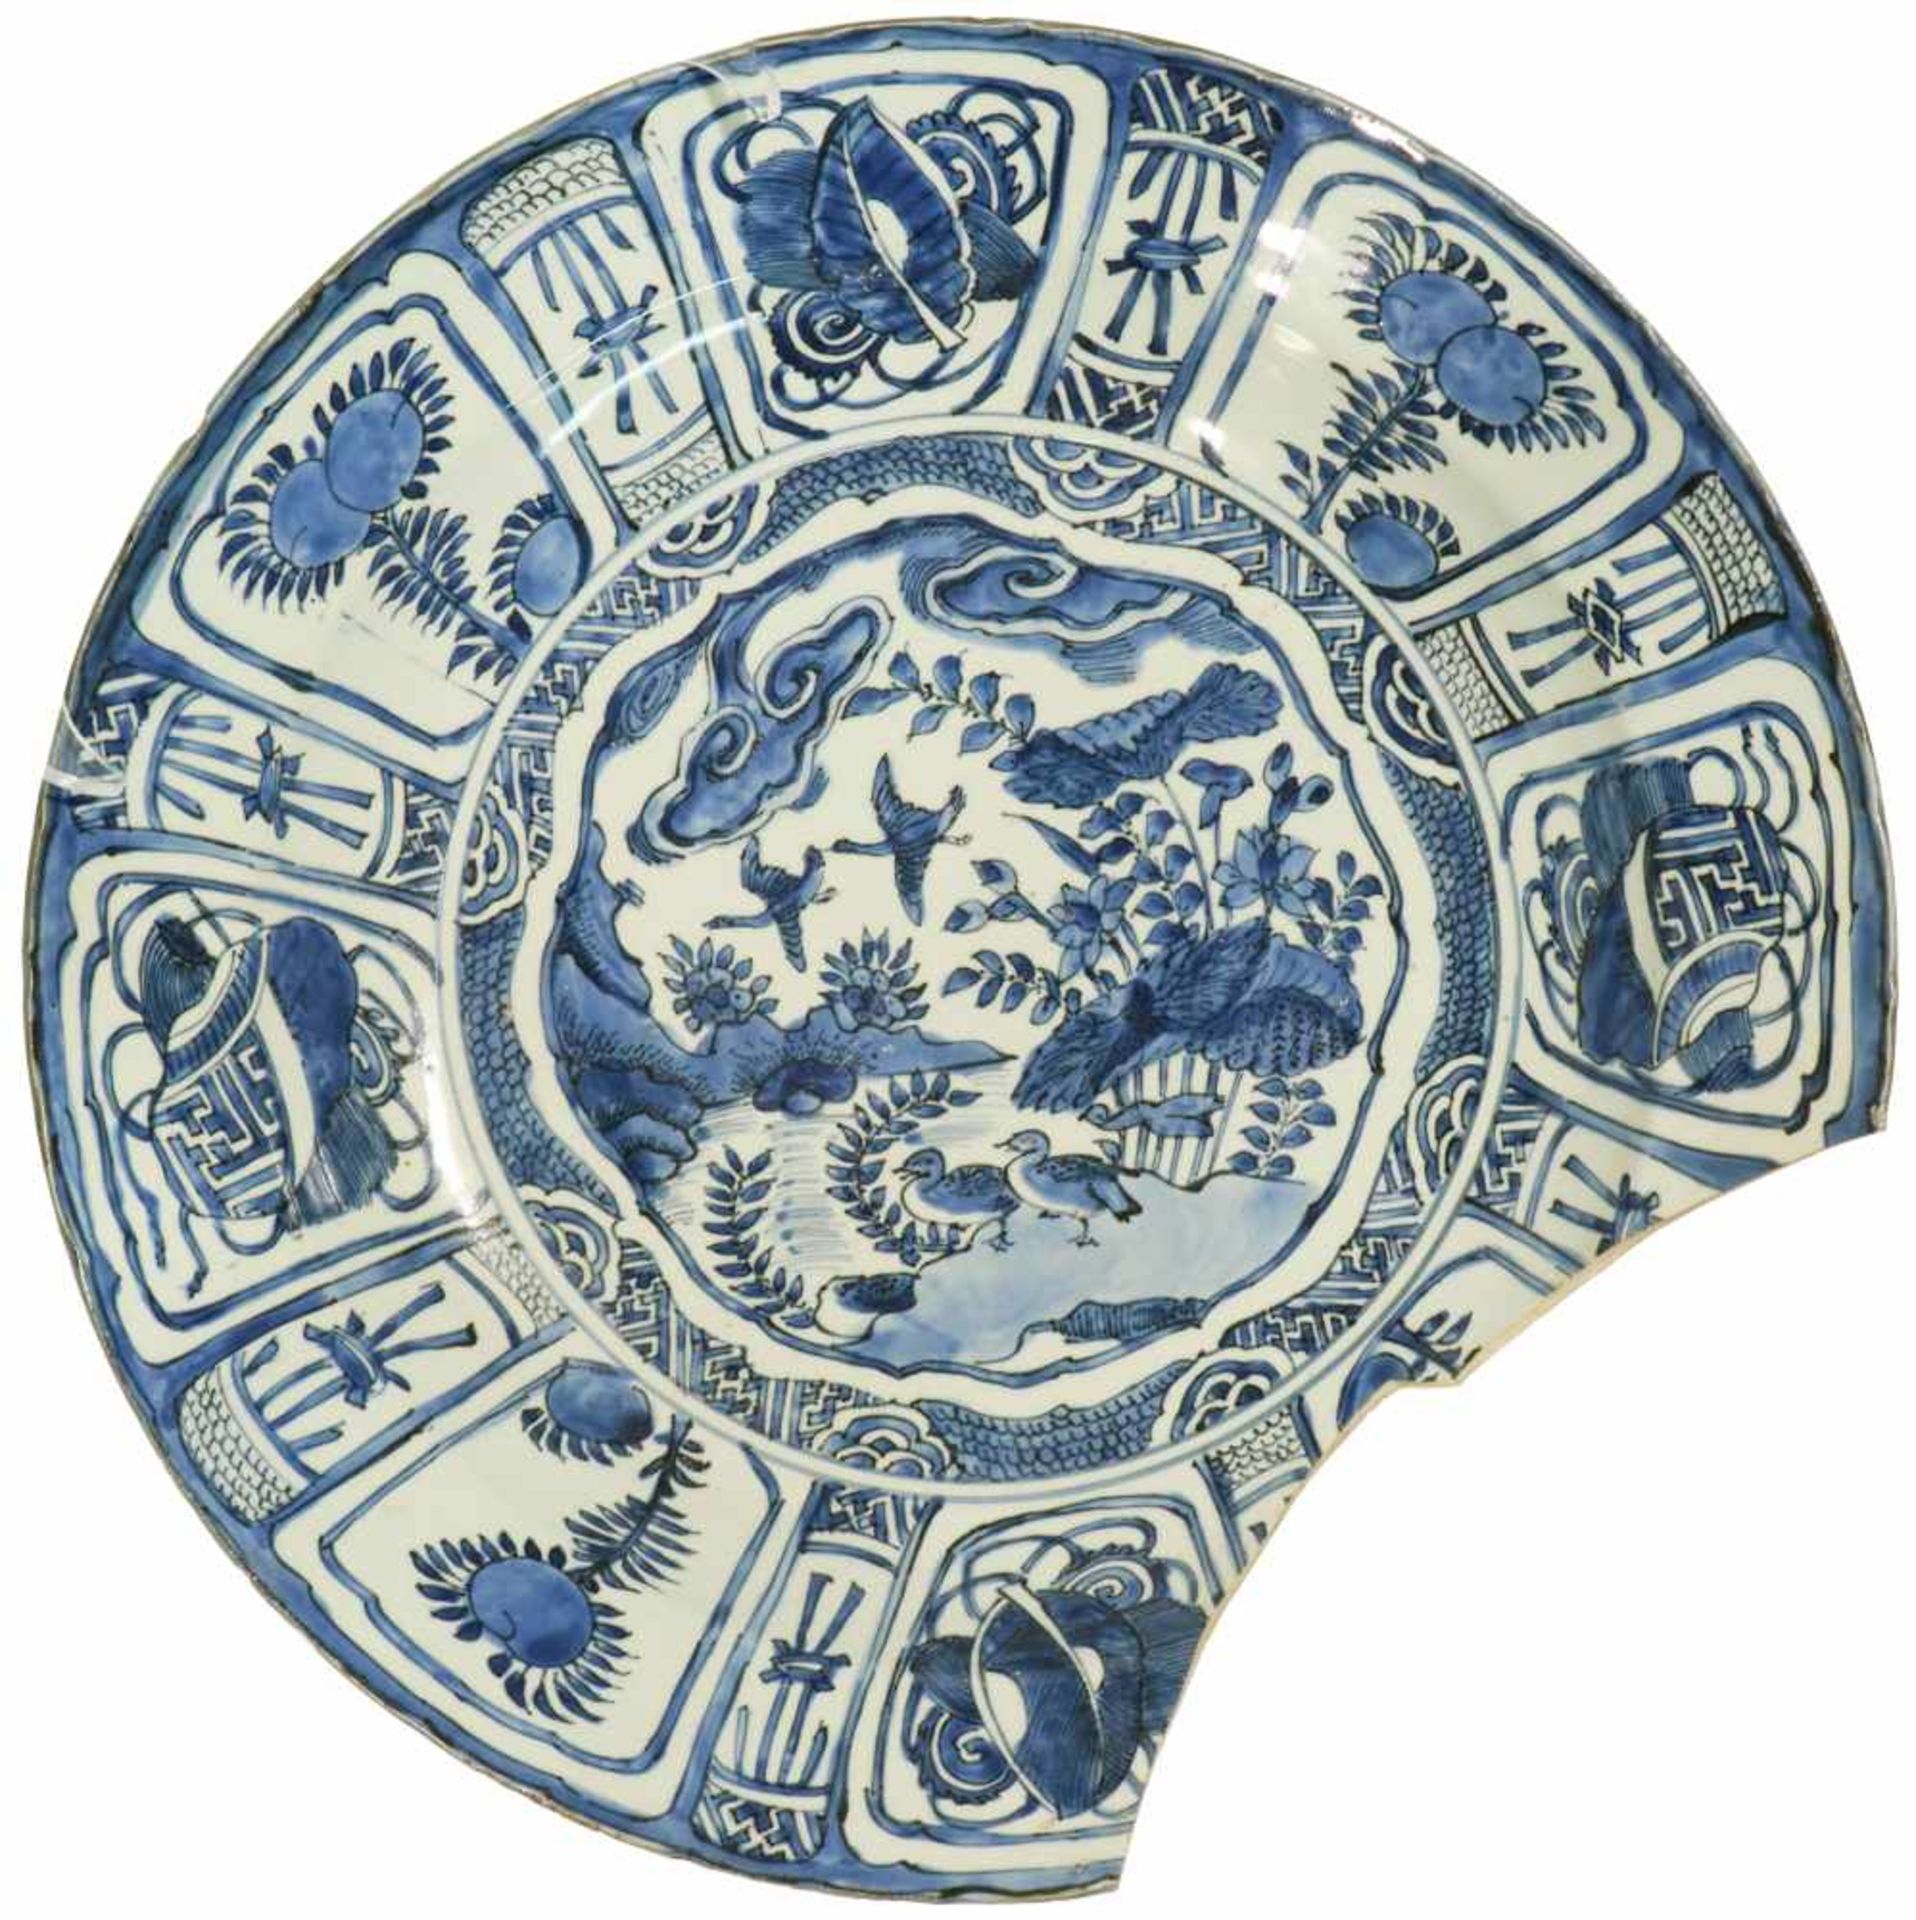 A capital porcelain 'kraak'-style dish with blue floral decor in division and landscape decor in the